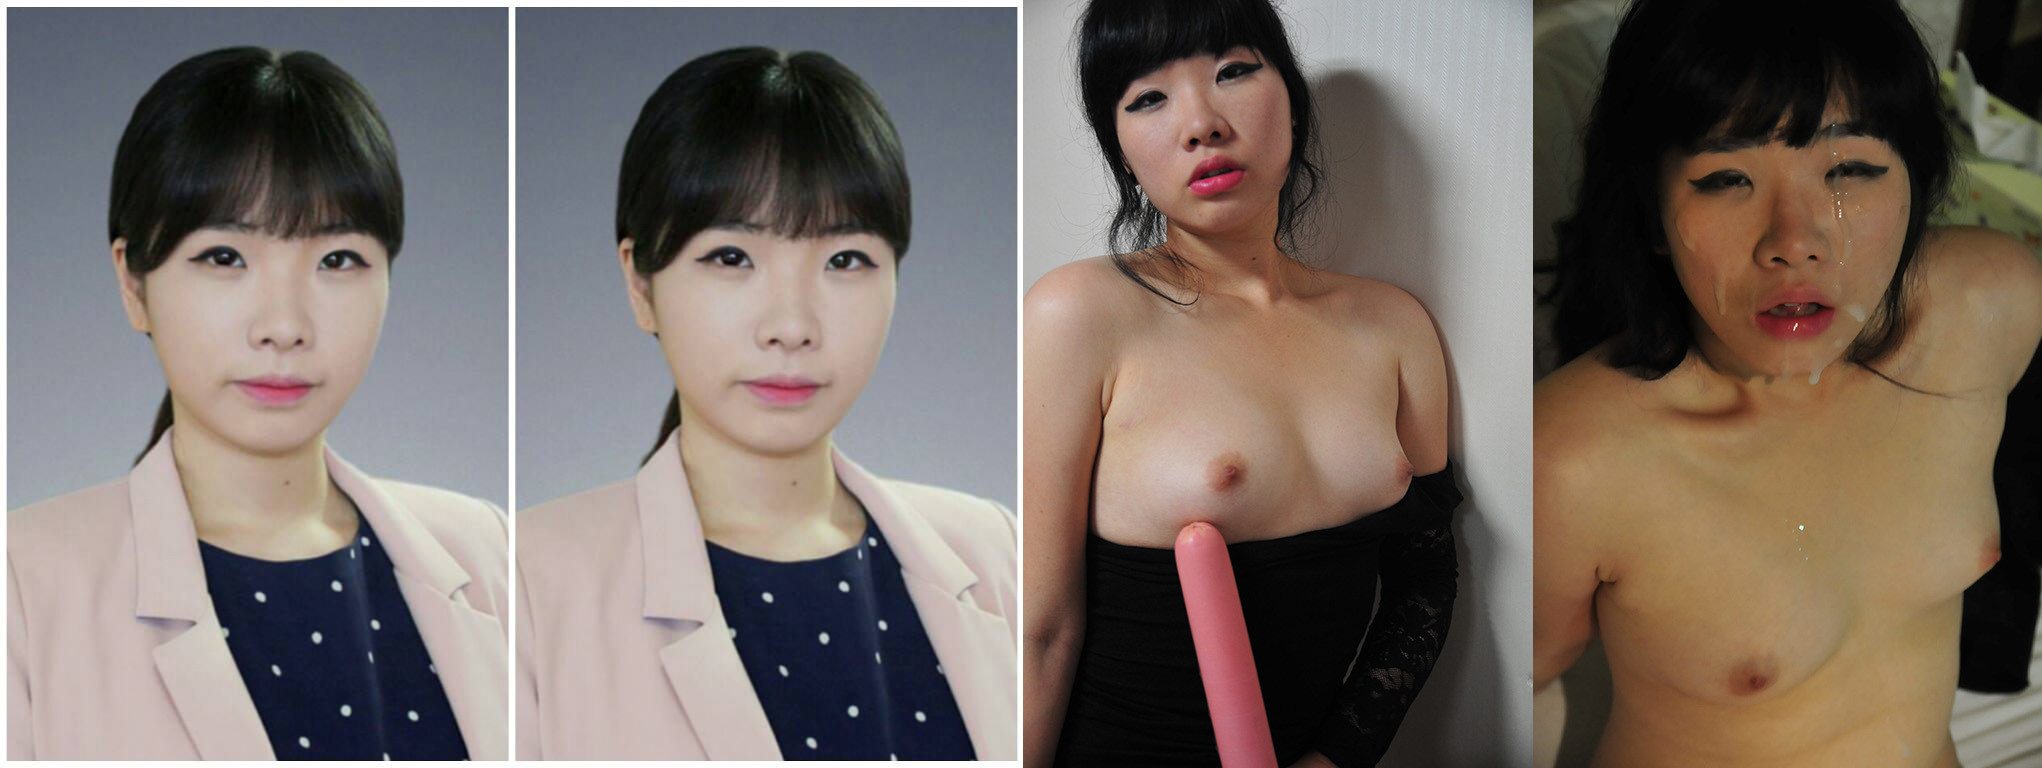 A real Korean woman with sperm on her face and other intimate photos with h...